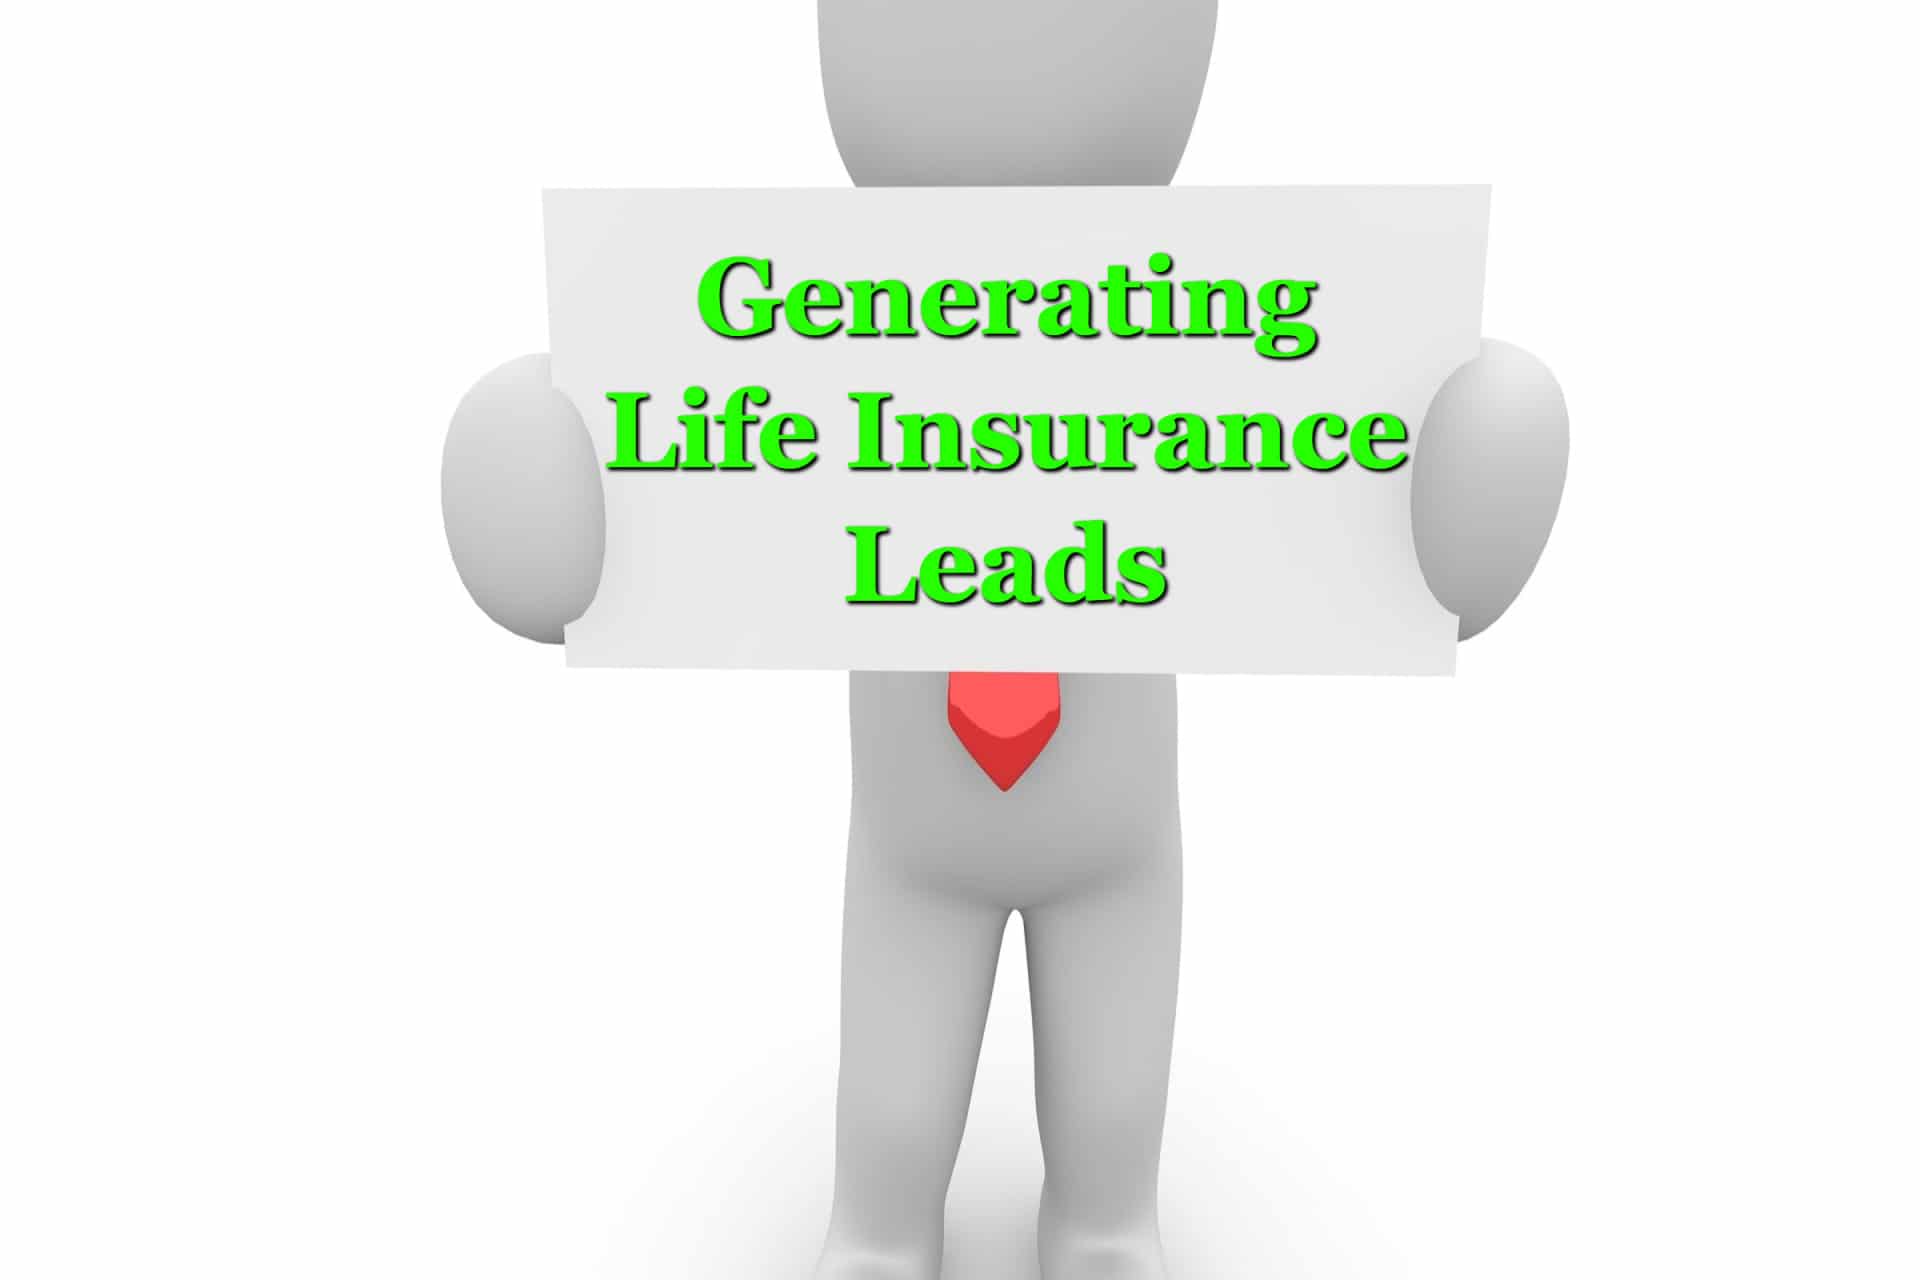 A figure wearing a tie and holding a sign that says: Generating Life Insurance Leads